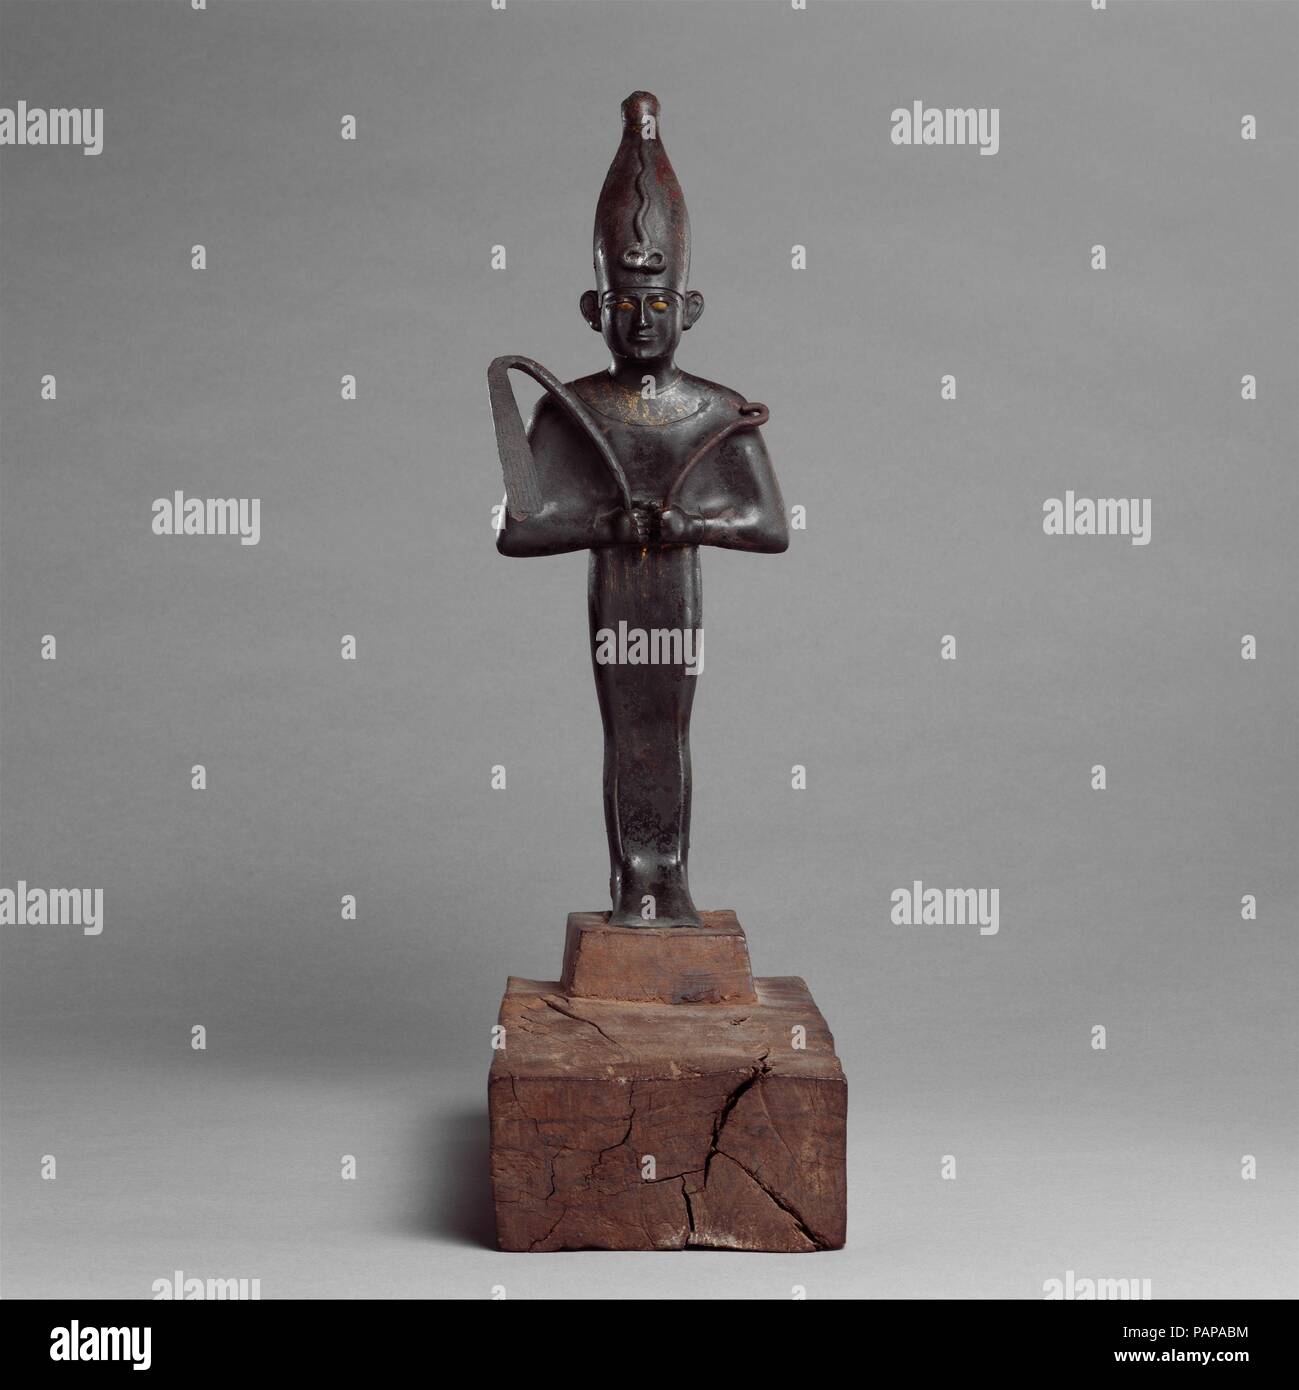 Osiris offered by the Astronomer of the House of Amun, Ibeb. Dimensions: Statue above base H. 35 cm (13 3/4 in); W 12.2 cm (4 13/16 in); D 9 cm (3 9/16 in);  Base H. 9.5 cm (3 3/4 in); W 13.4 cm (5 1/4 in); D 26.2 cm (10 5/16 in). Dynasty: Dynasty 21-24. Date: ca. 1070-712 B.C..  This statuette was excavated at Hiba (or Teudjoi), a fortress town south of Herakleopolis, in Middle Egypt, and an important outpost at the northern limits of the Theban controlled part of the country from the late New Kingdom through the Third Intermediate Period. The site has not been thoroughly examined archaeologi Stock Photo